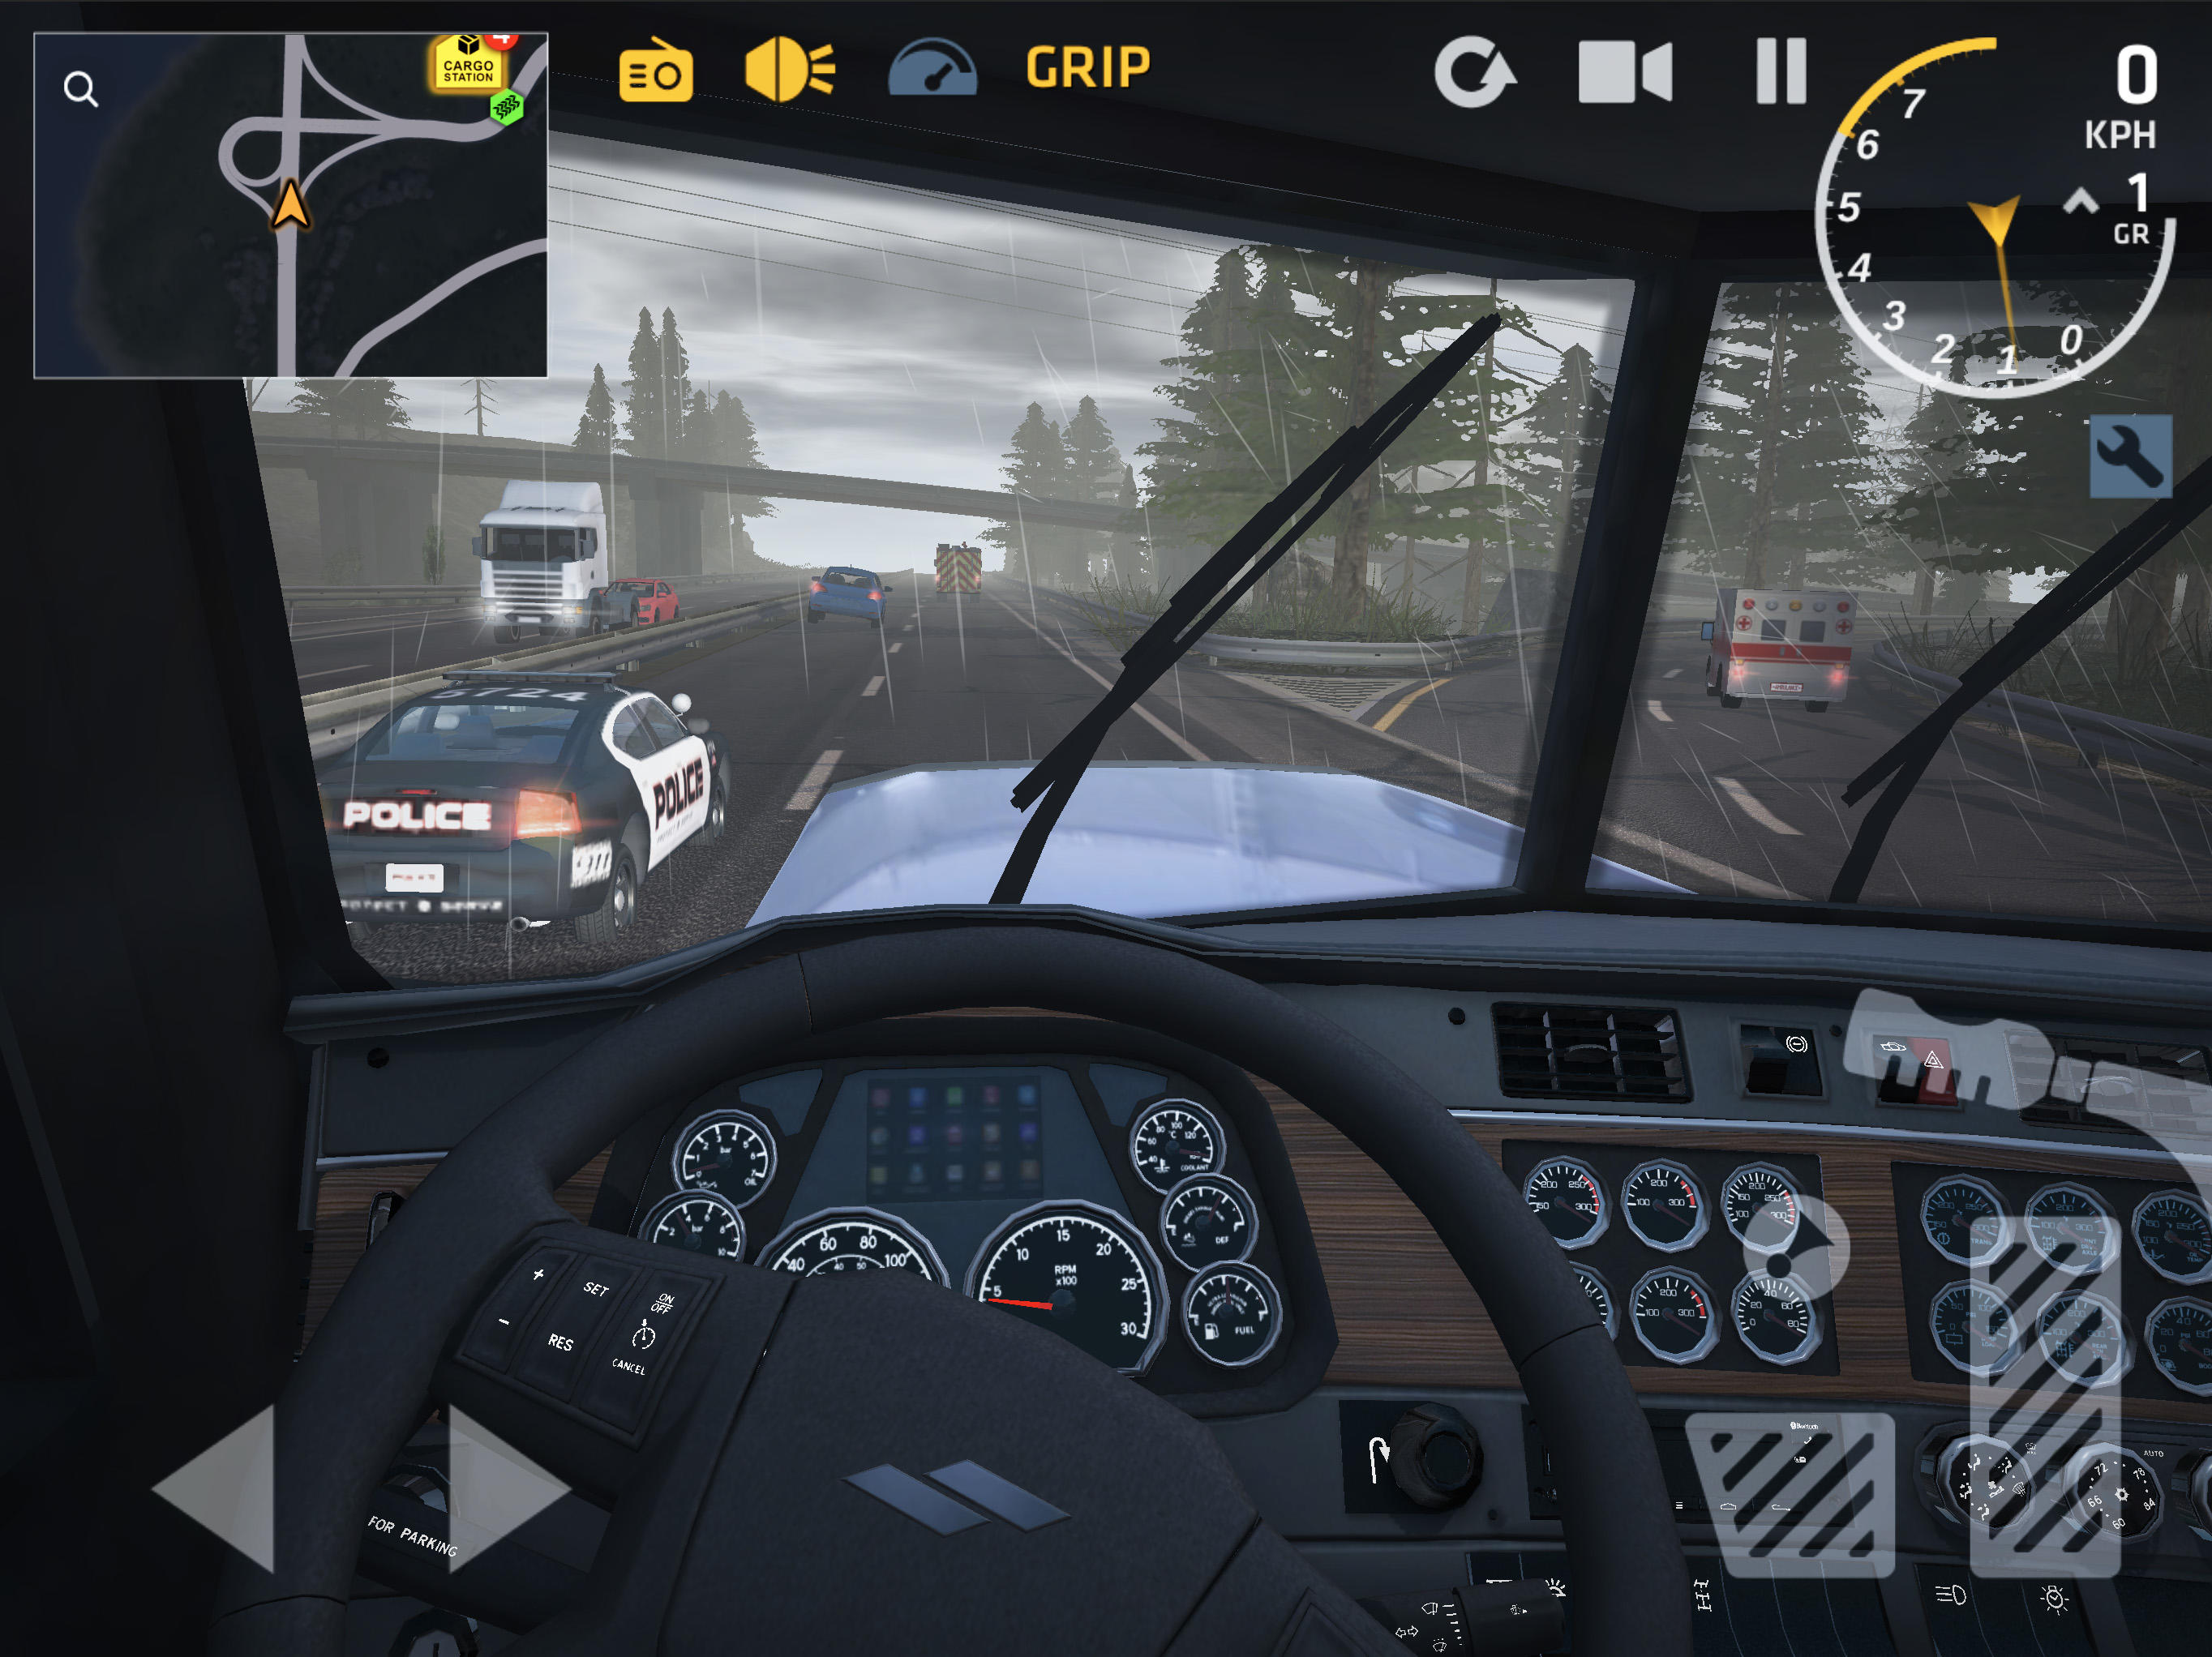 Top 5 Truck Driving Games For Android, Best truck simulator game on A